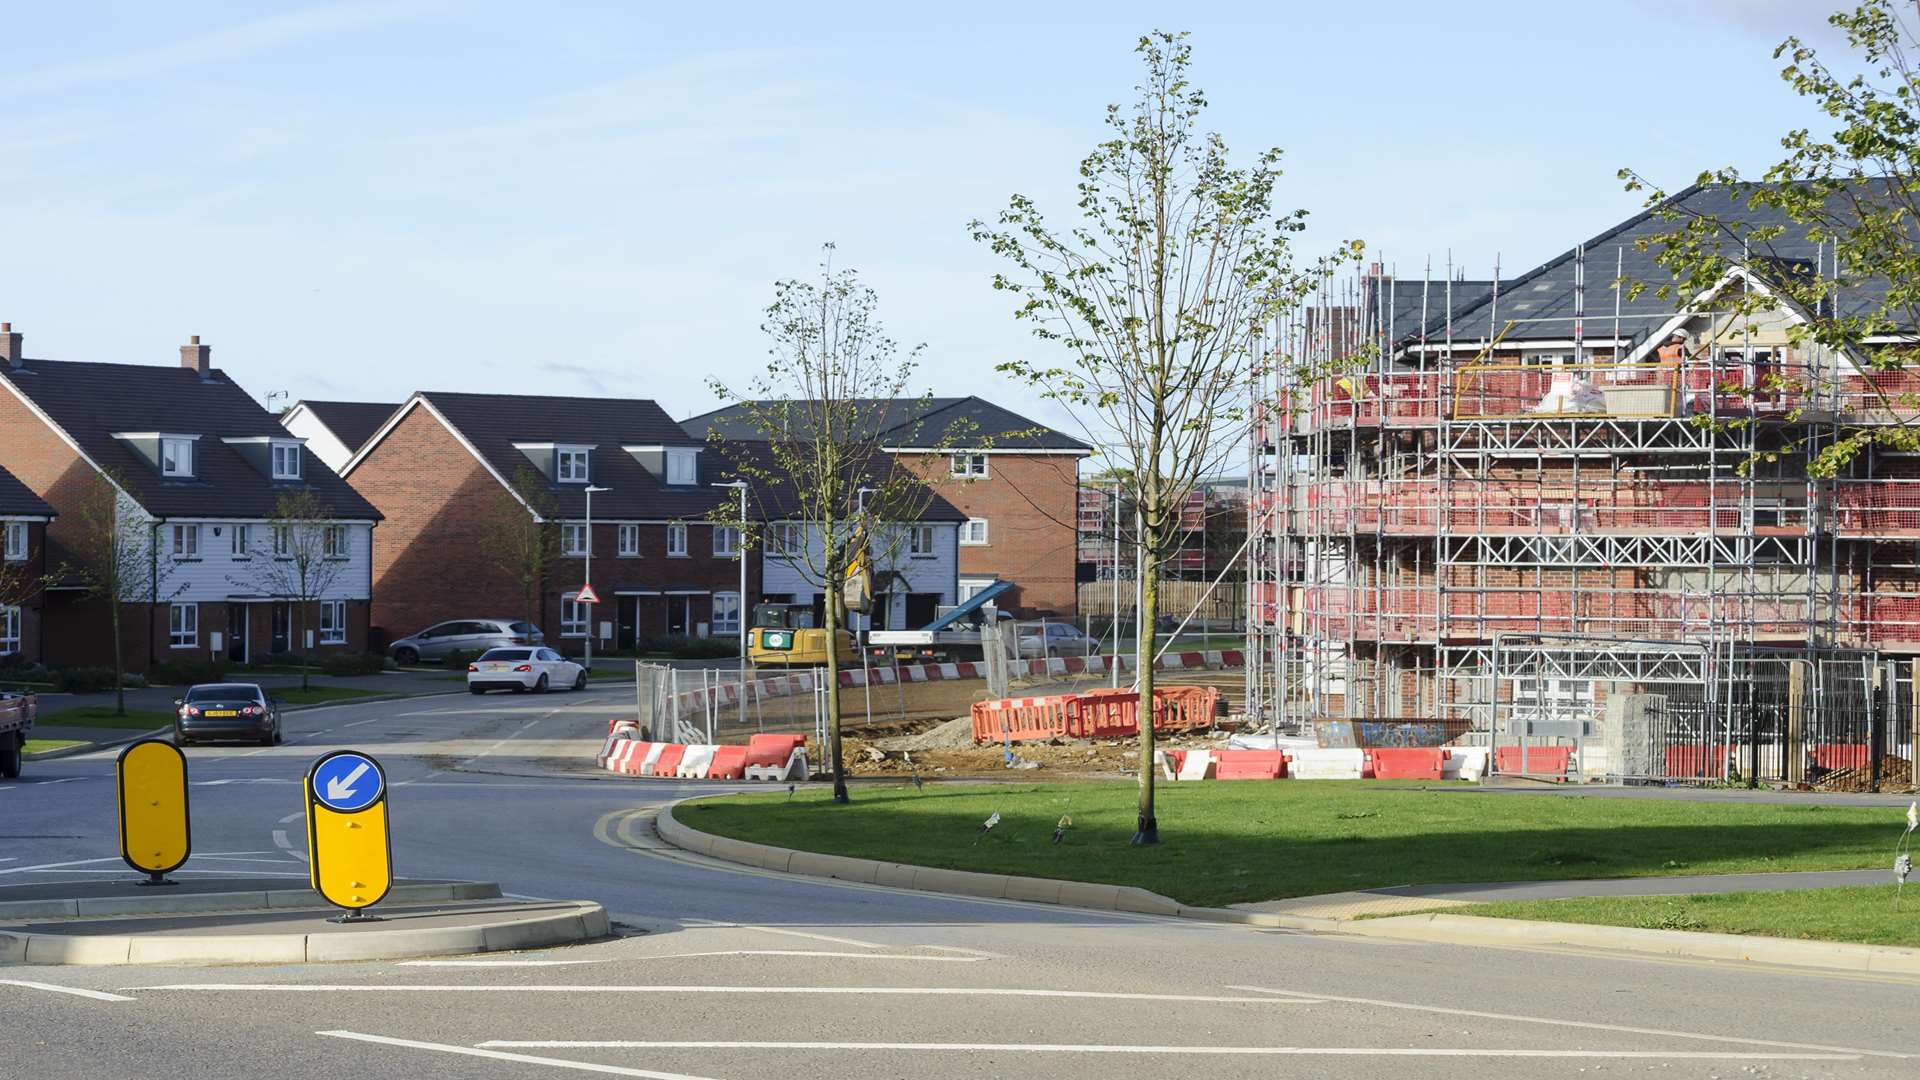 More new homes could be built in Swale under government proposals